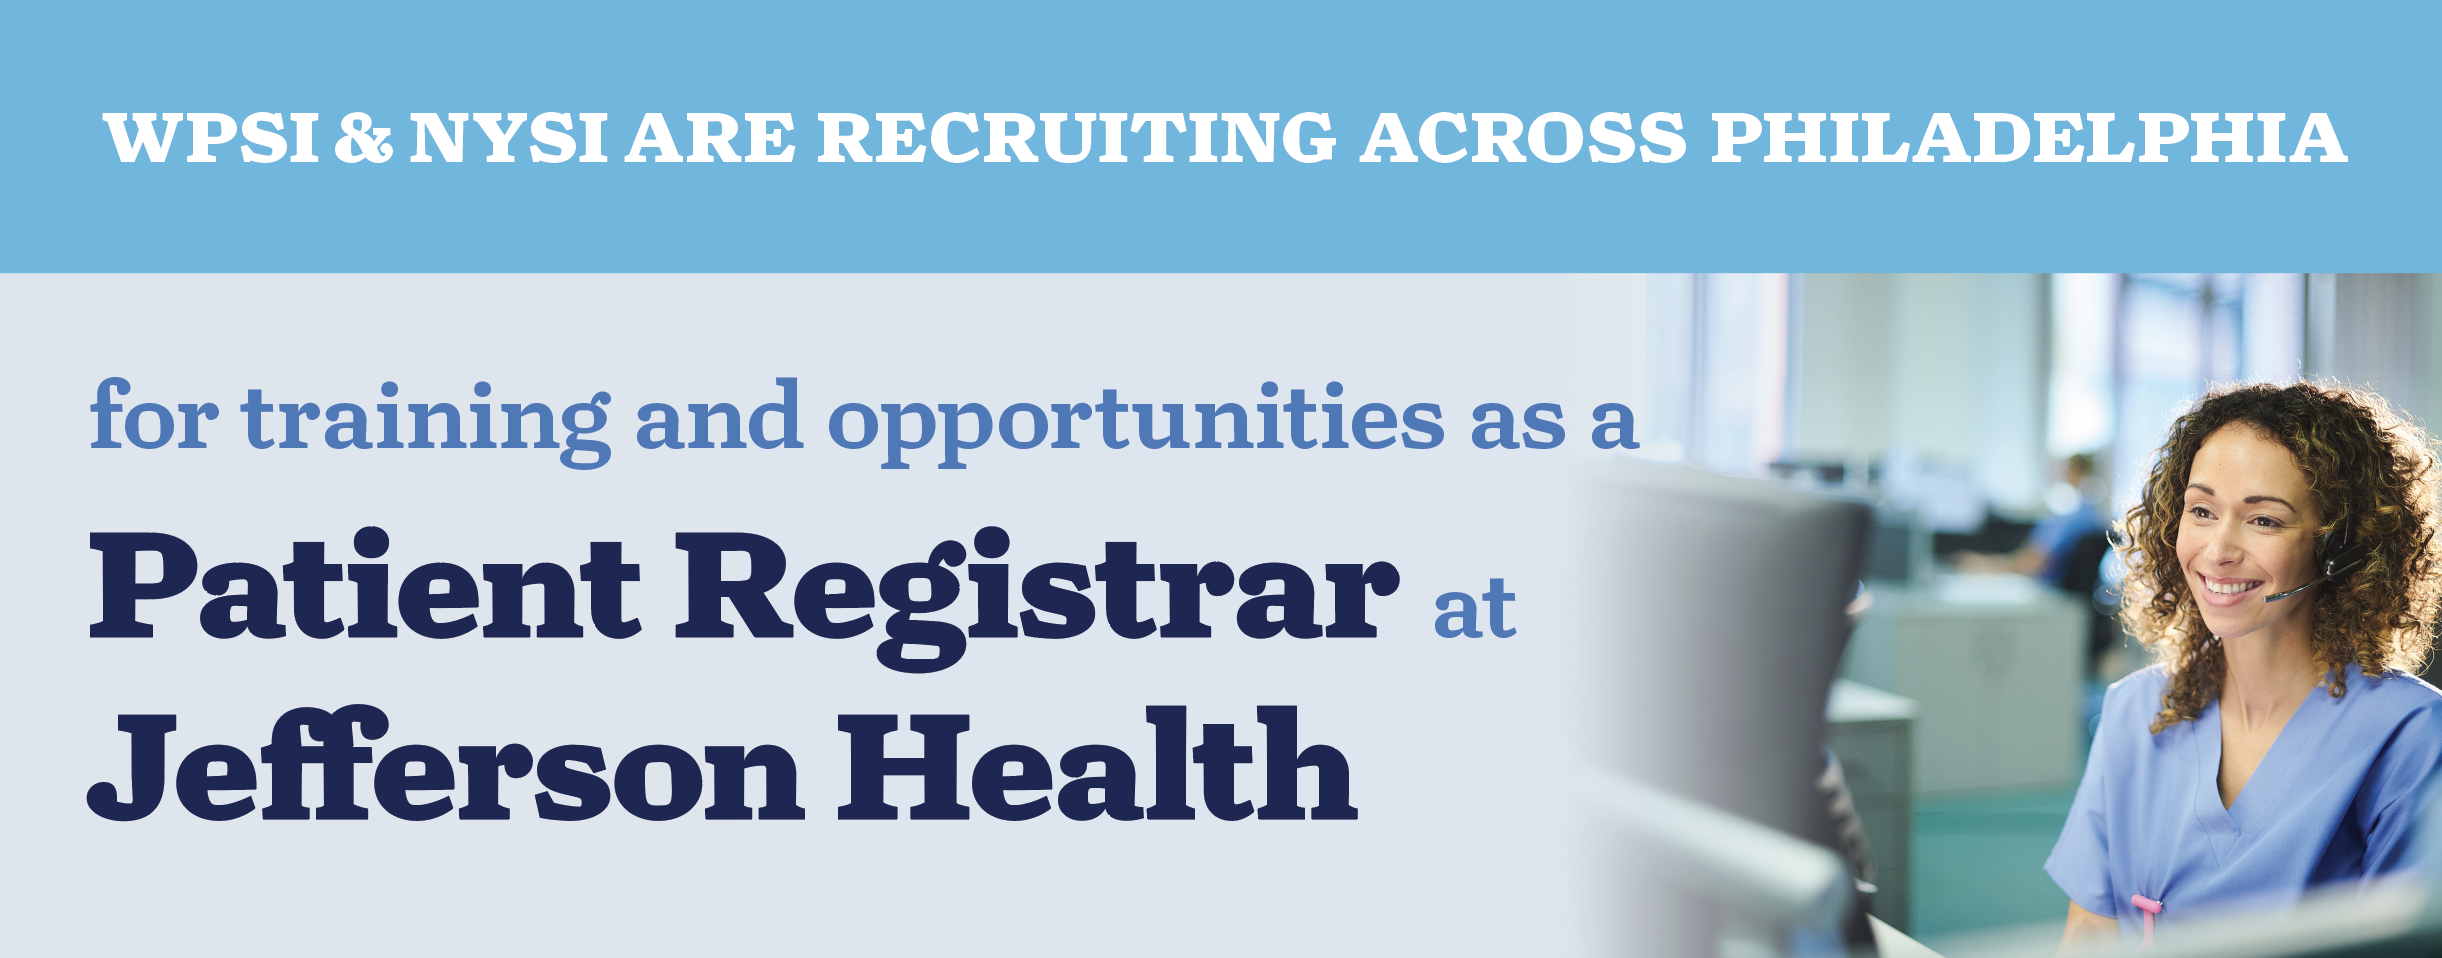 WPSI & NYSI ARE RECRUITING ACROSS PHILADELPHIA for training and opportunities as a Patient Registrar at Jefferson Health